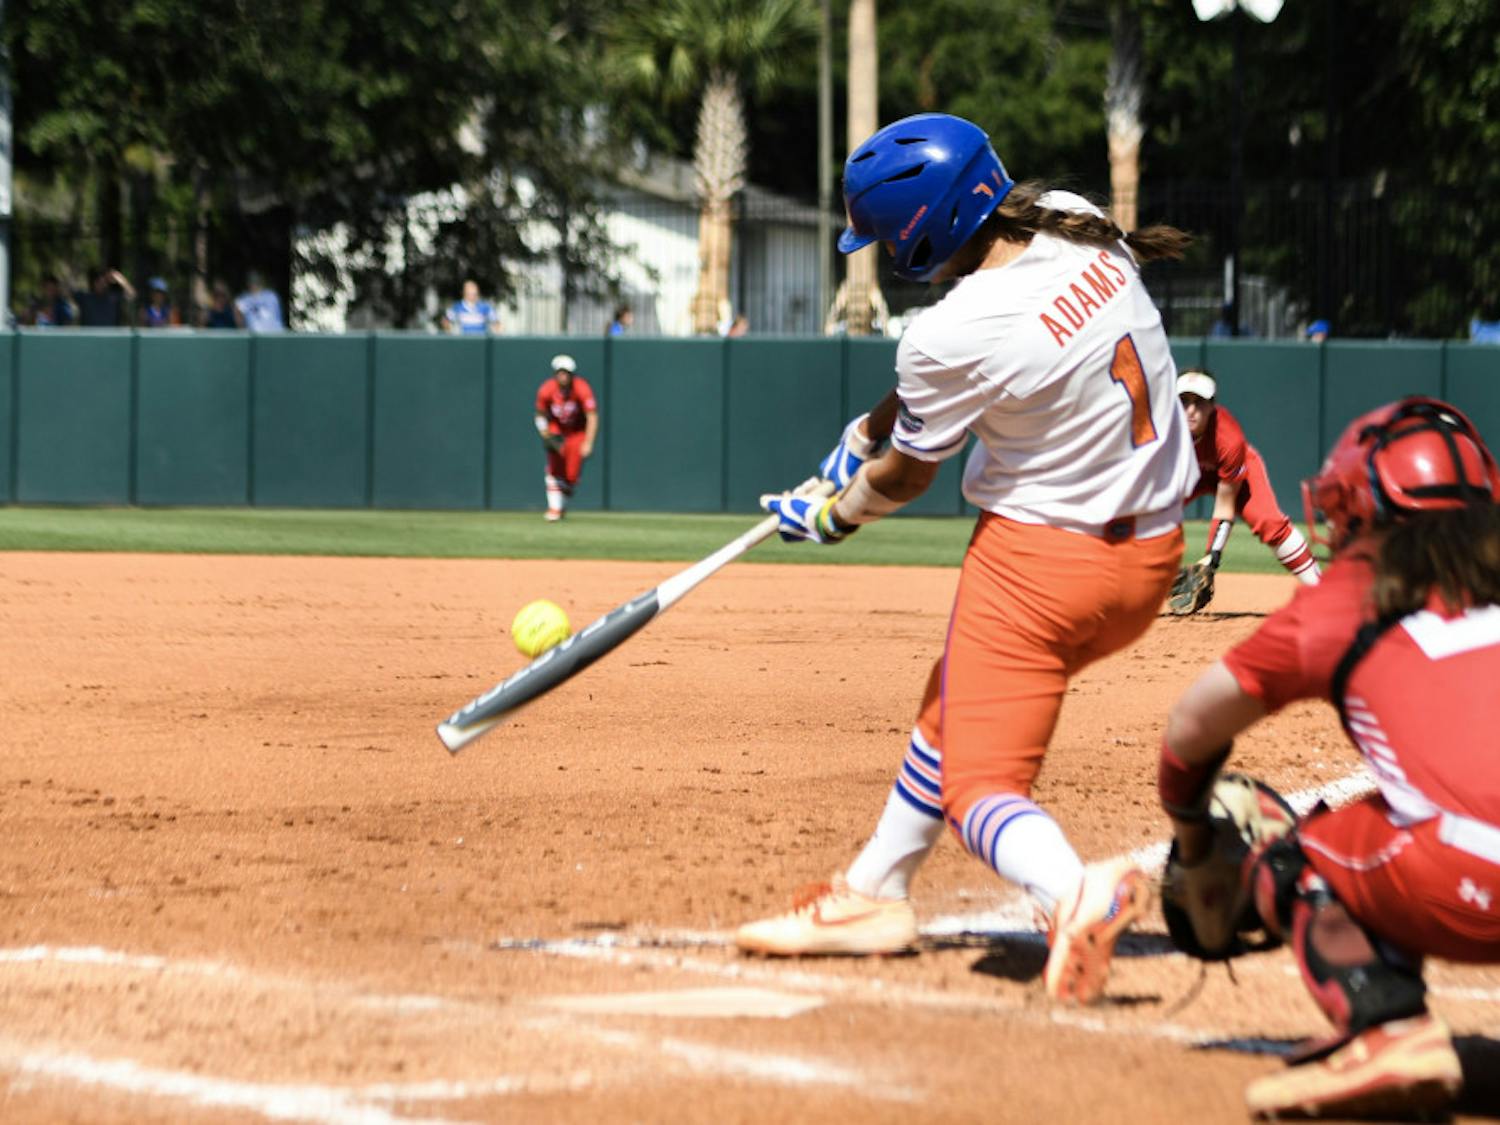 Second baseman Hannah Adams was a key contributor for Florida at the NCAA Gainesville Regional, going 4 for 8 with two RBIs and two runs scored.